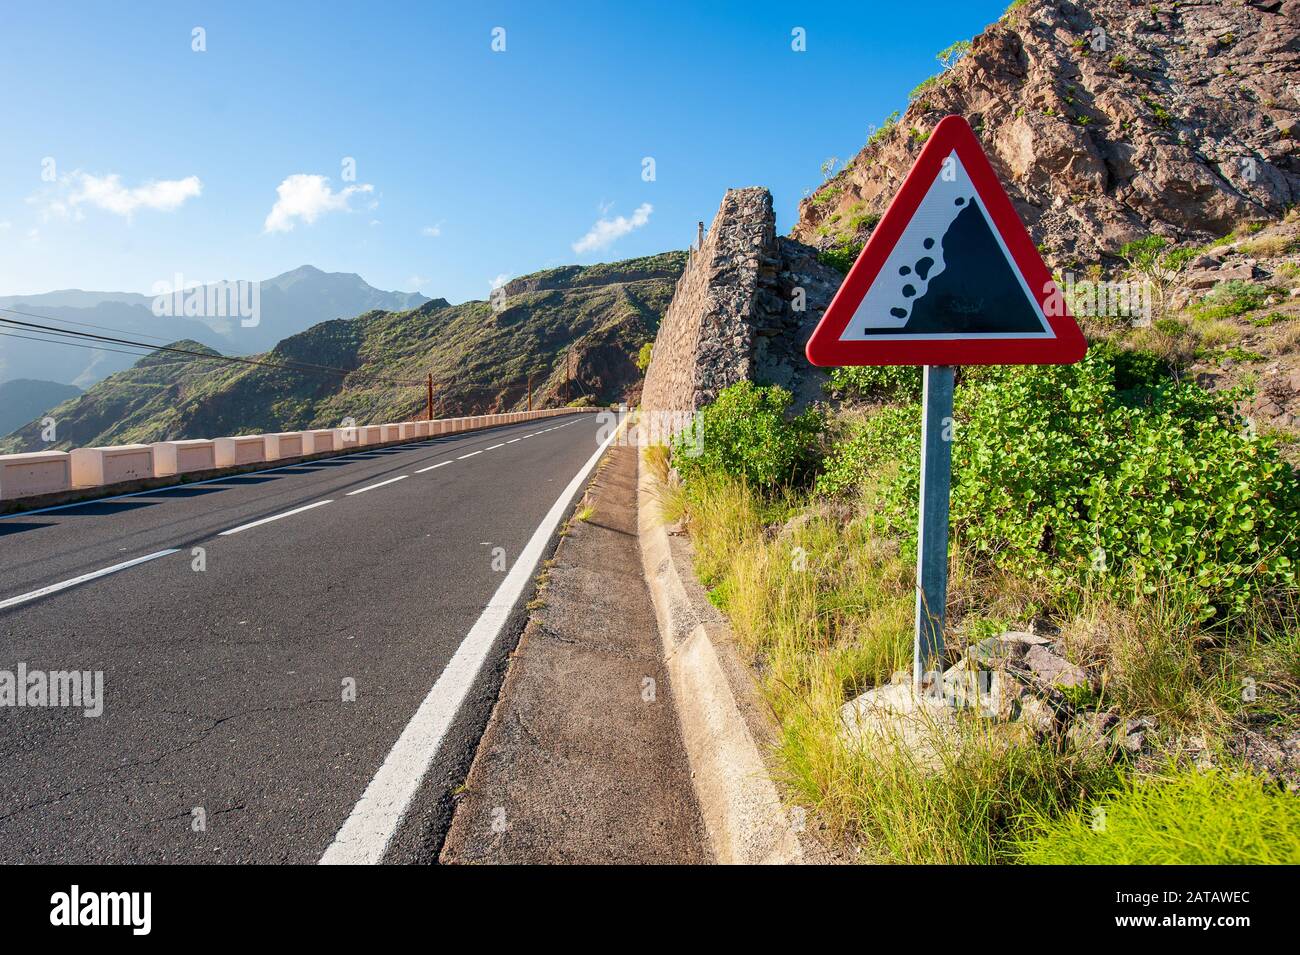 A falling rocks sign on a road on the Canary Island Tenerife. Stock Photo